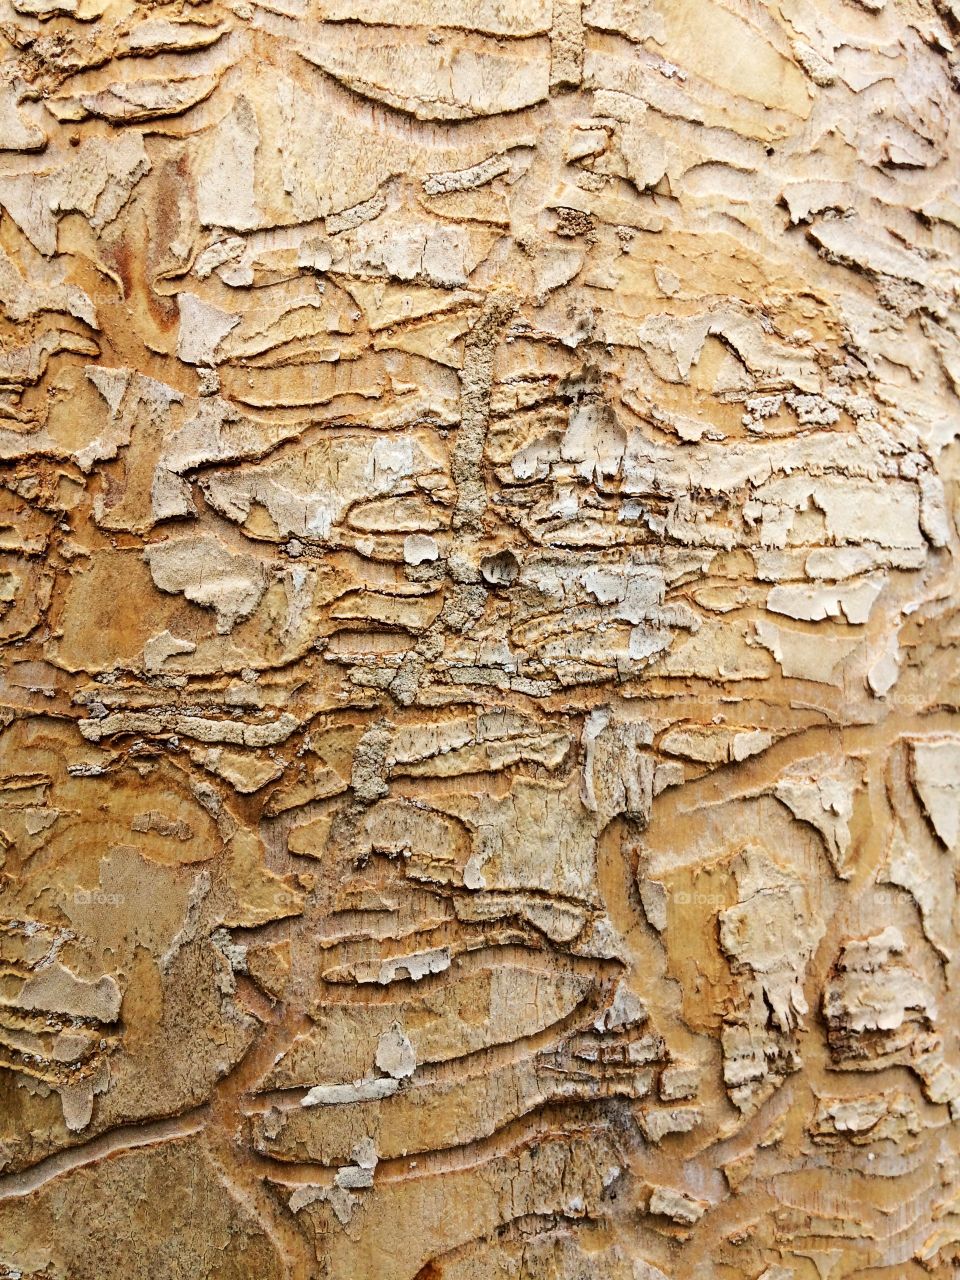 Natural design on tree trunk made by bugs 